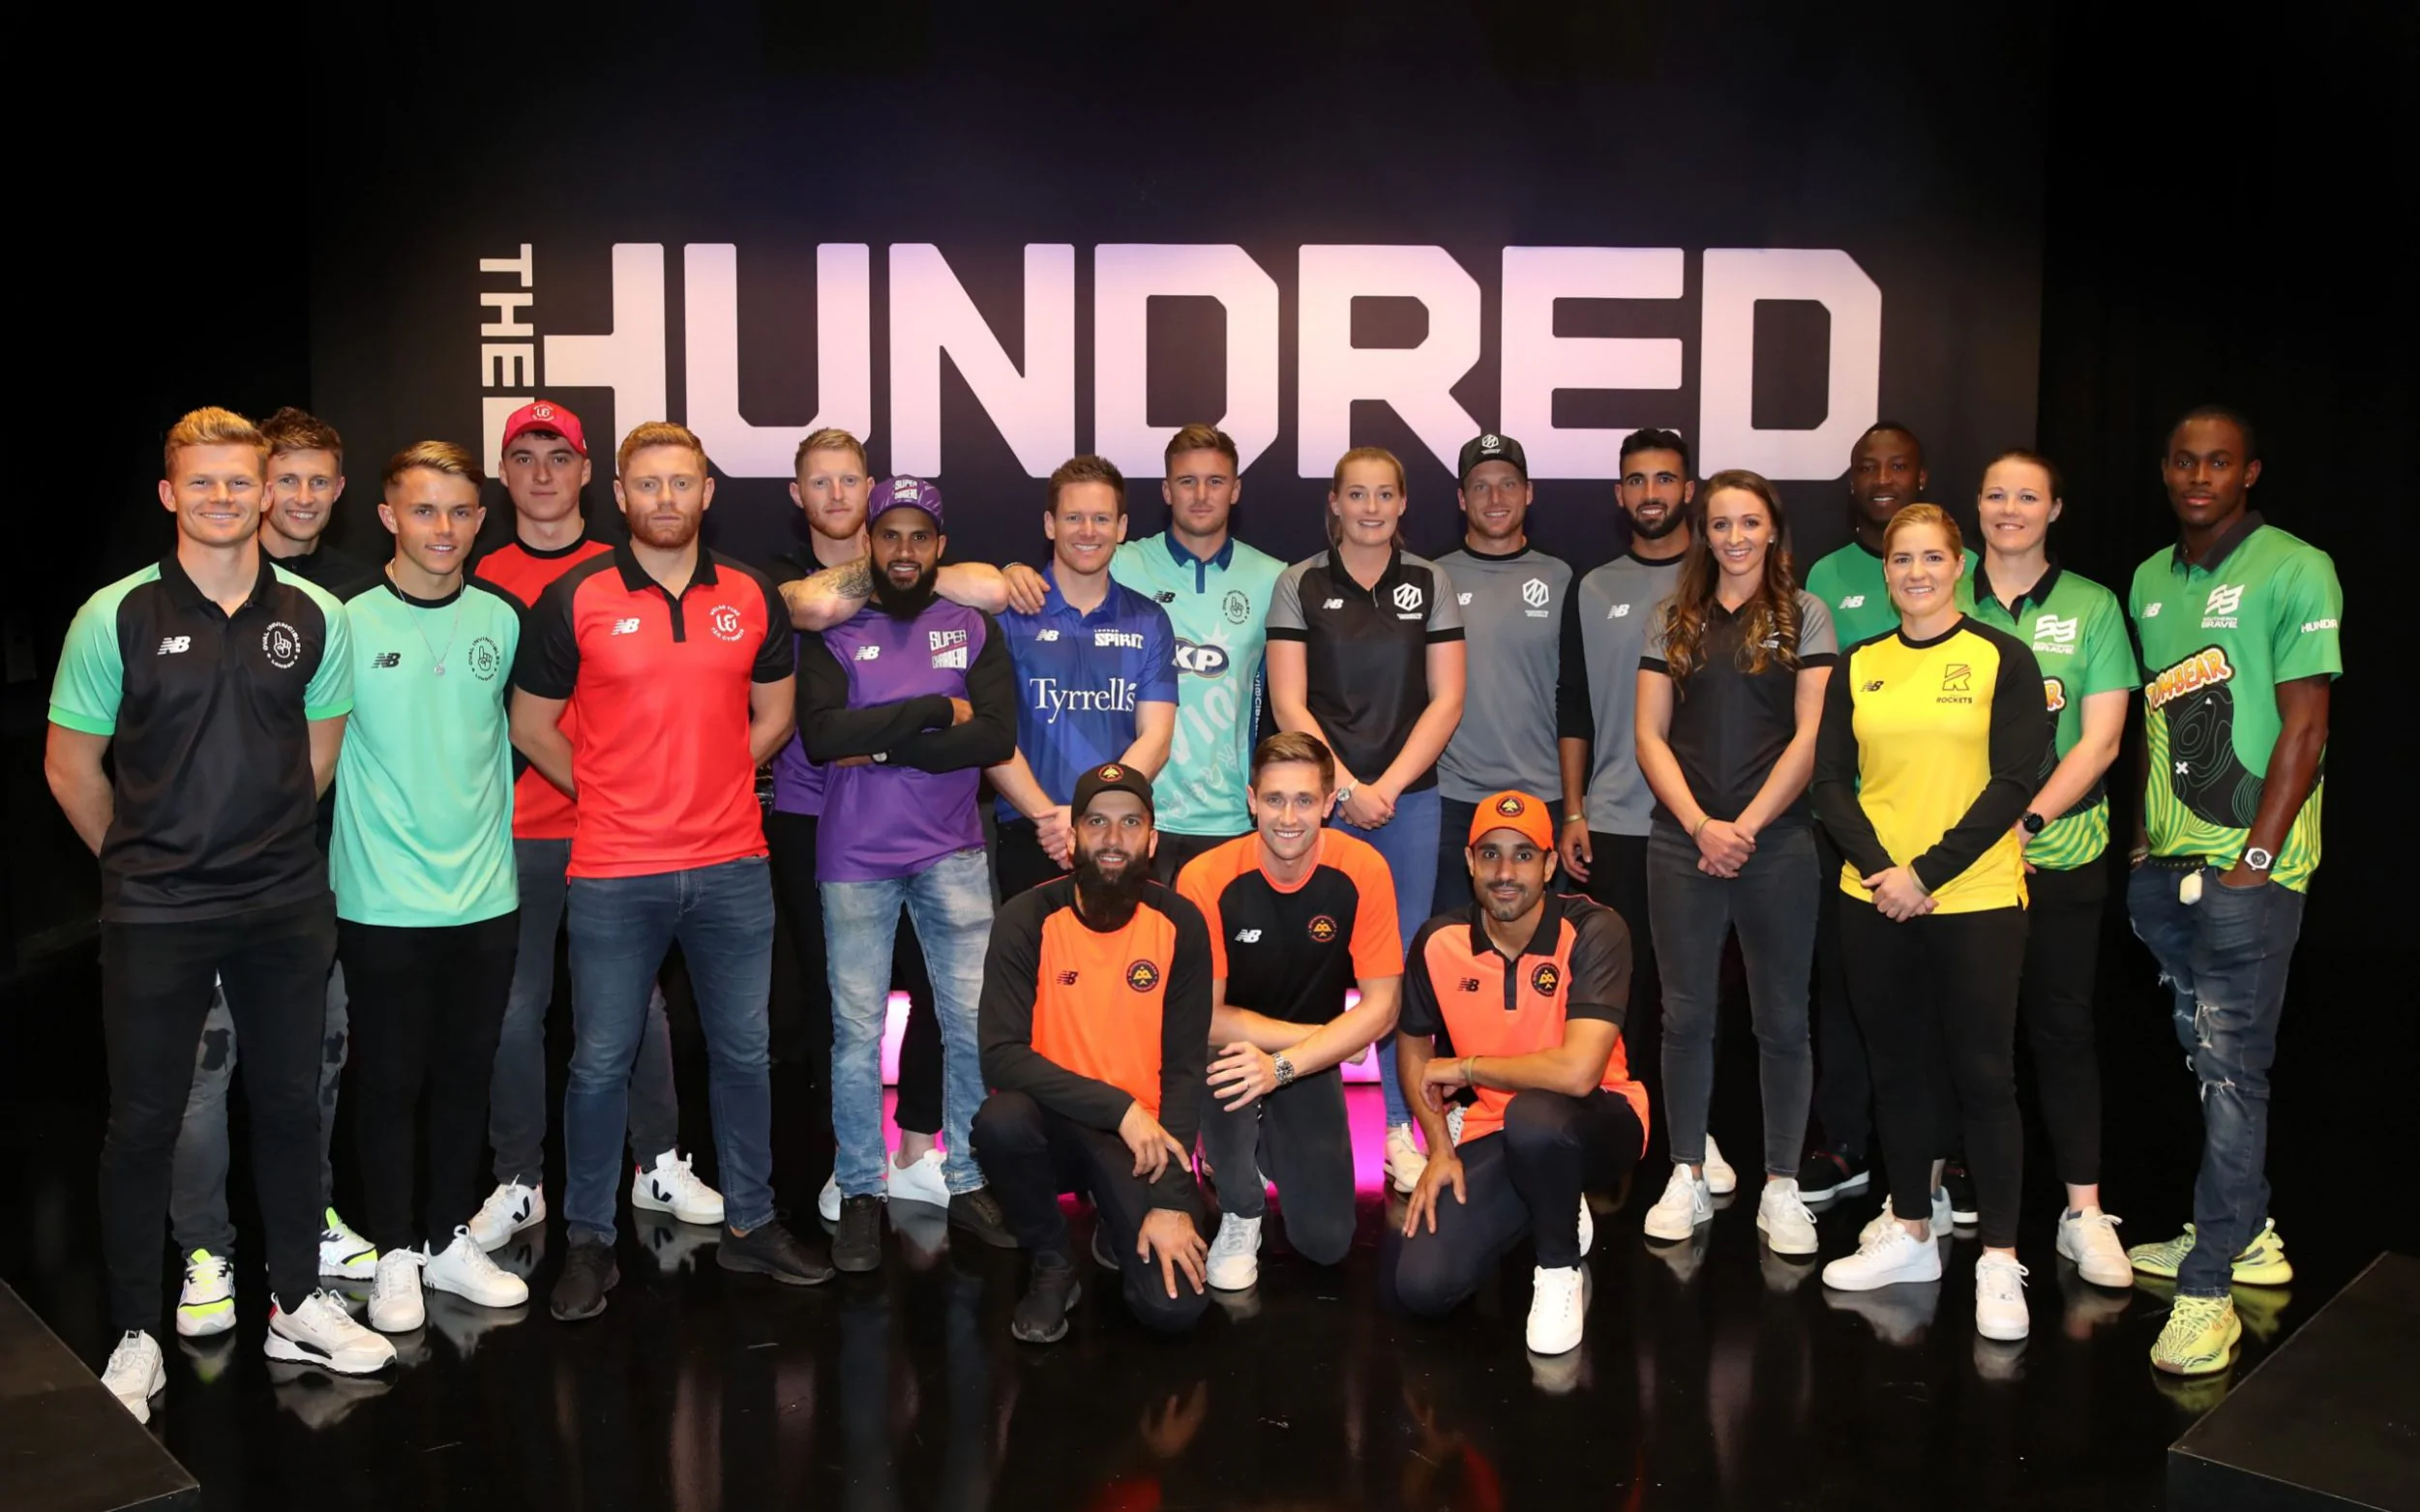 The Hundred is set to launch this summer in England | ECB